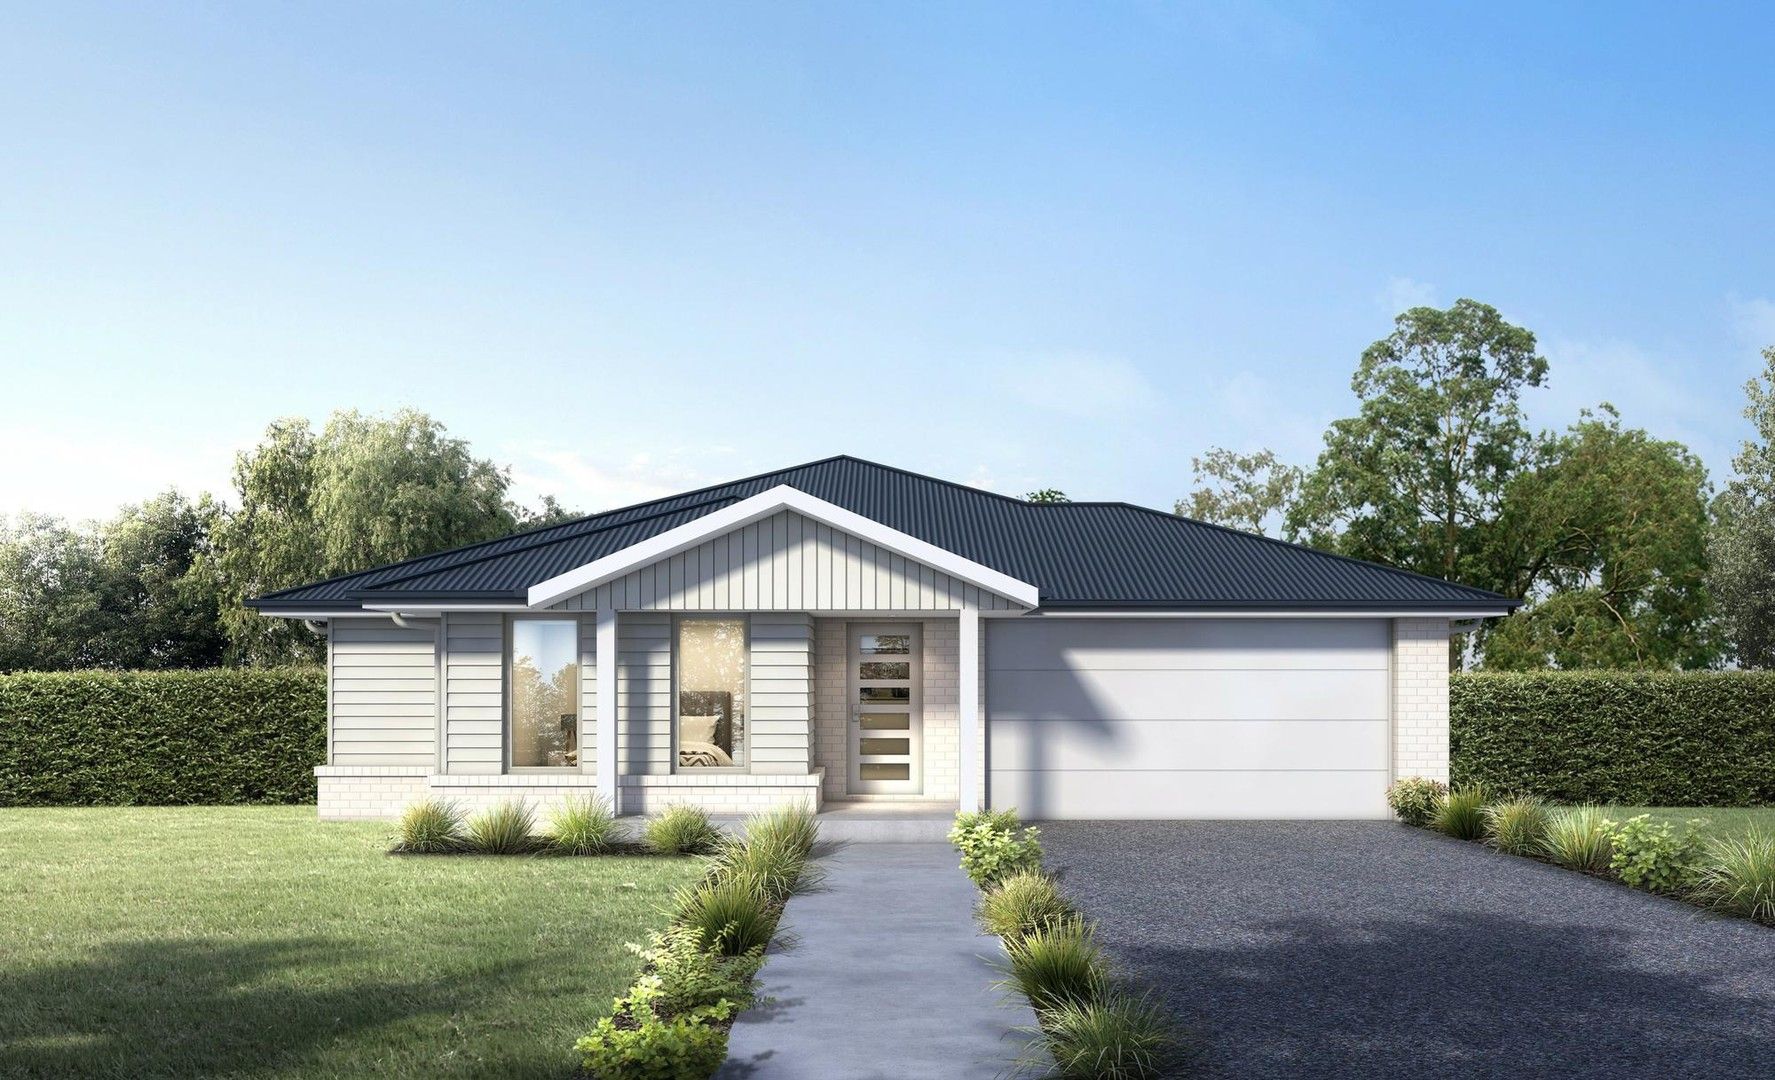 4 bedrooms New House & Land in 1302 Oak Street CLIFTLEIGH NSW, 2321